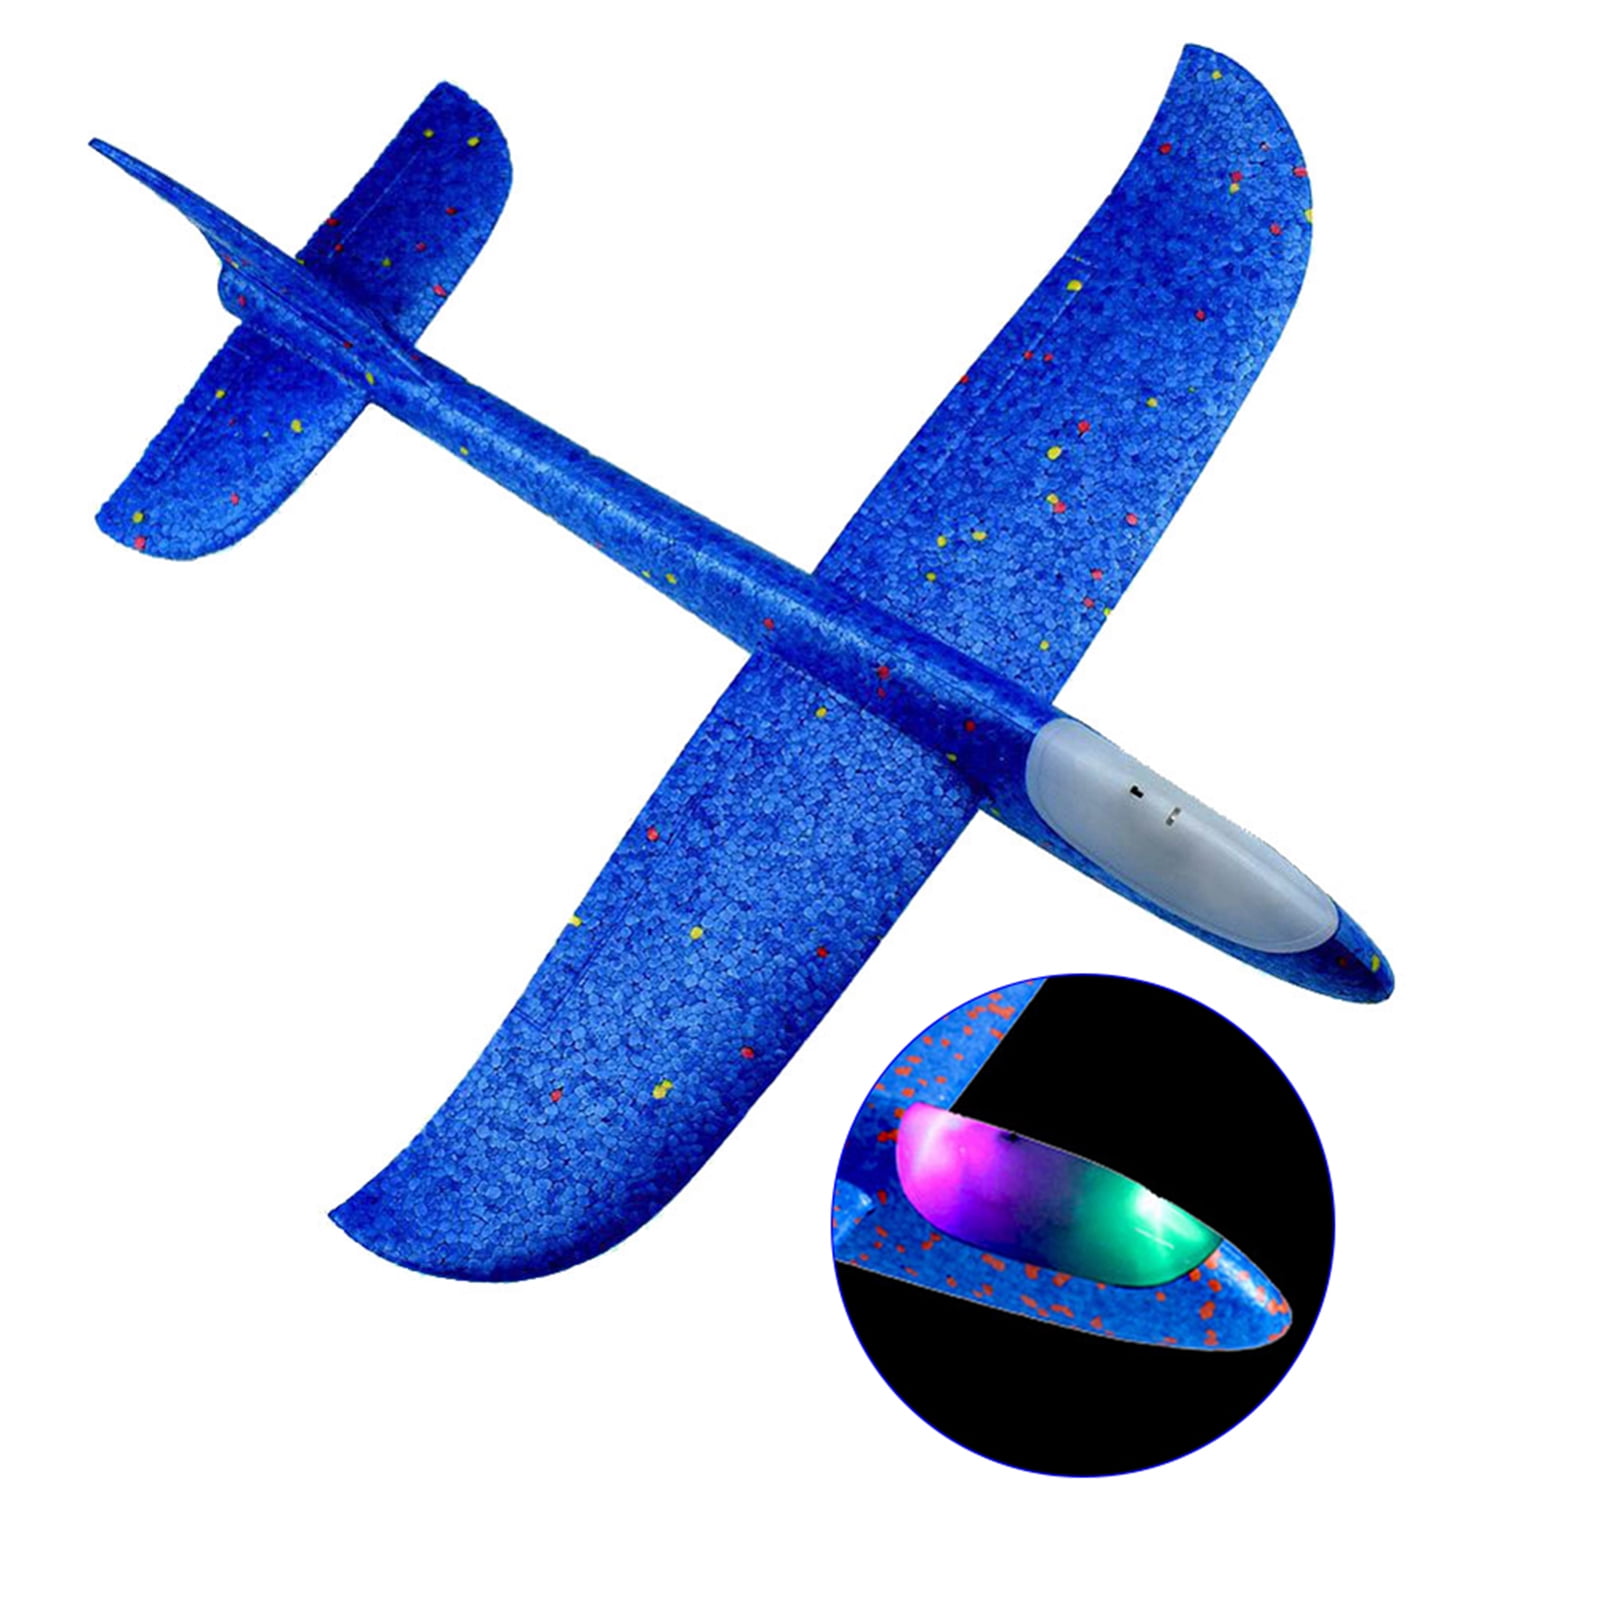 Vektenxi Premium Quality Outdoor Manual Sport Airplane Aircraft Toy Throwing Hand Glider Model Kids Gift Blue